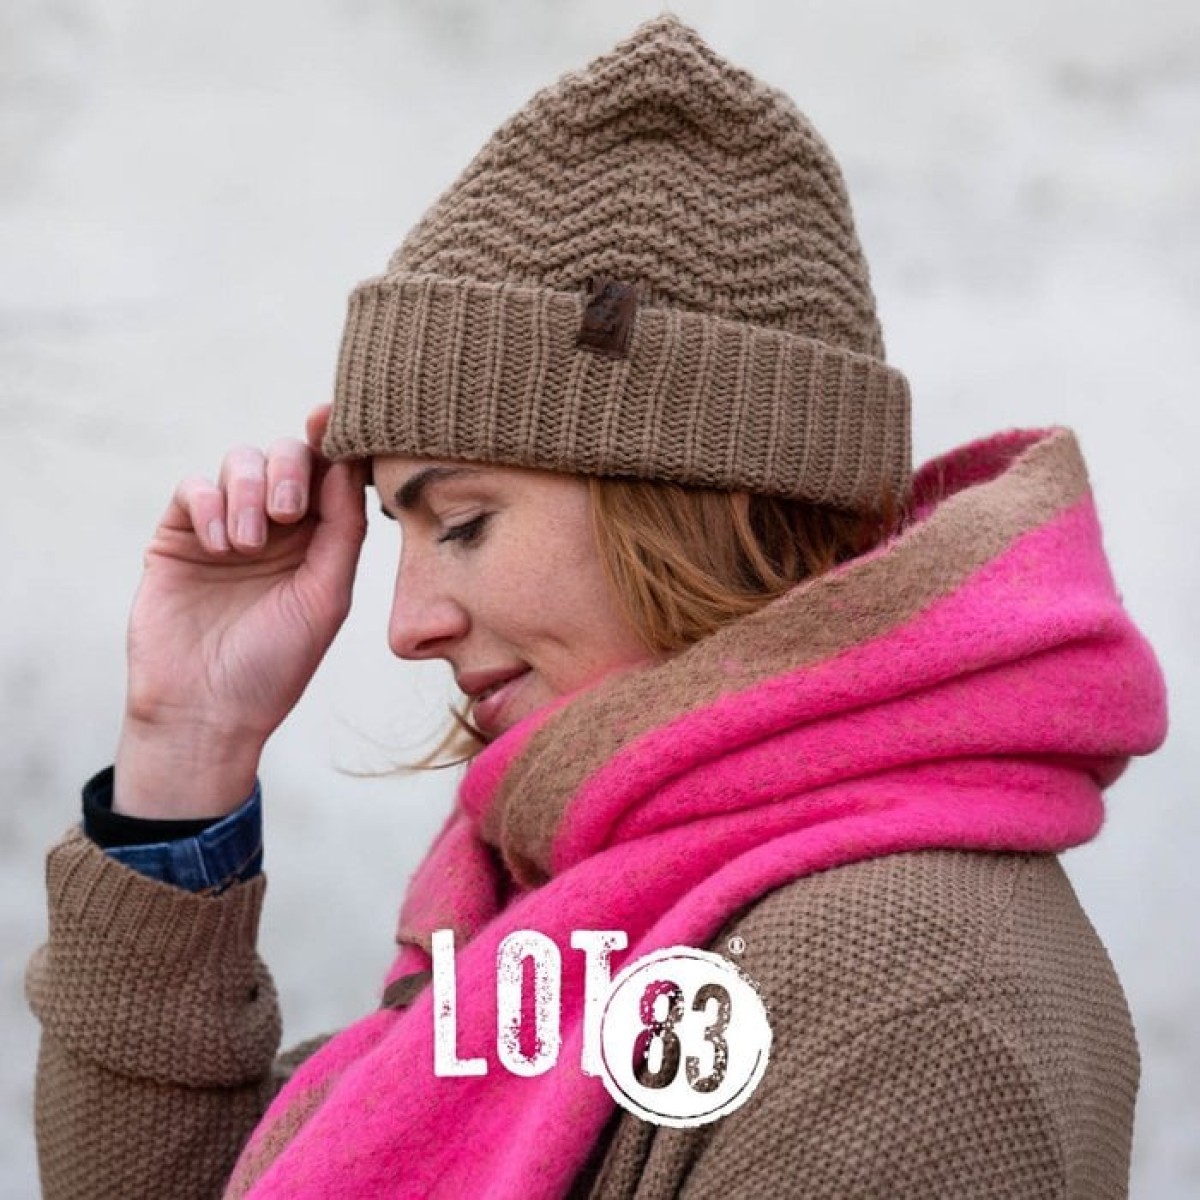 Lot83 Muts Sophie - Taupe